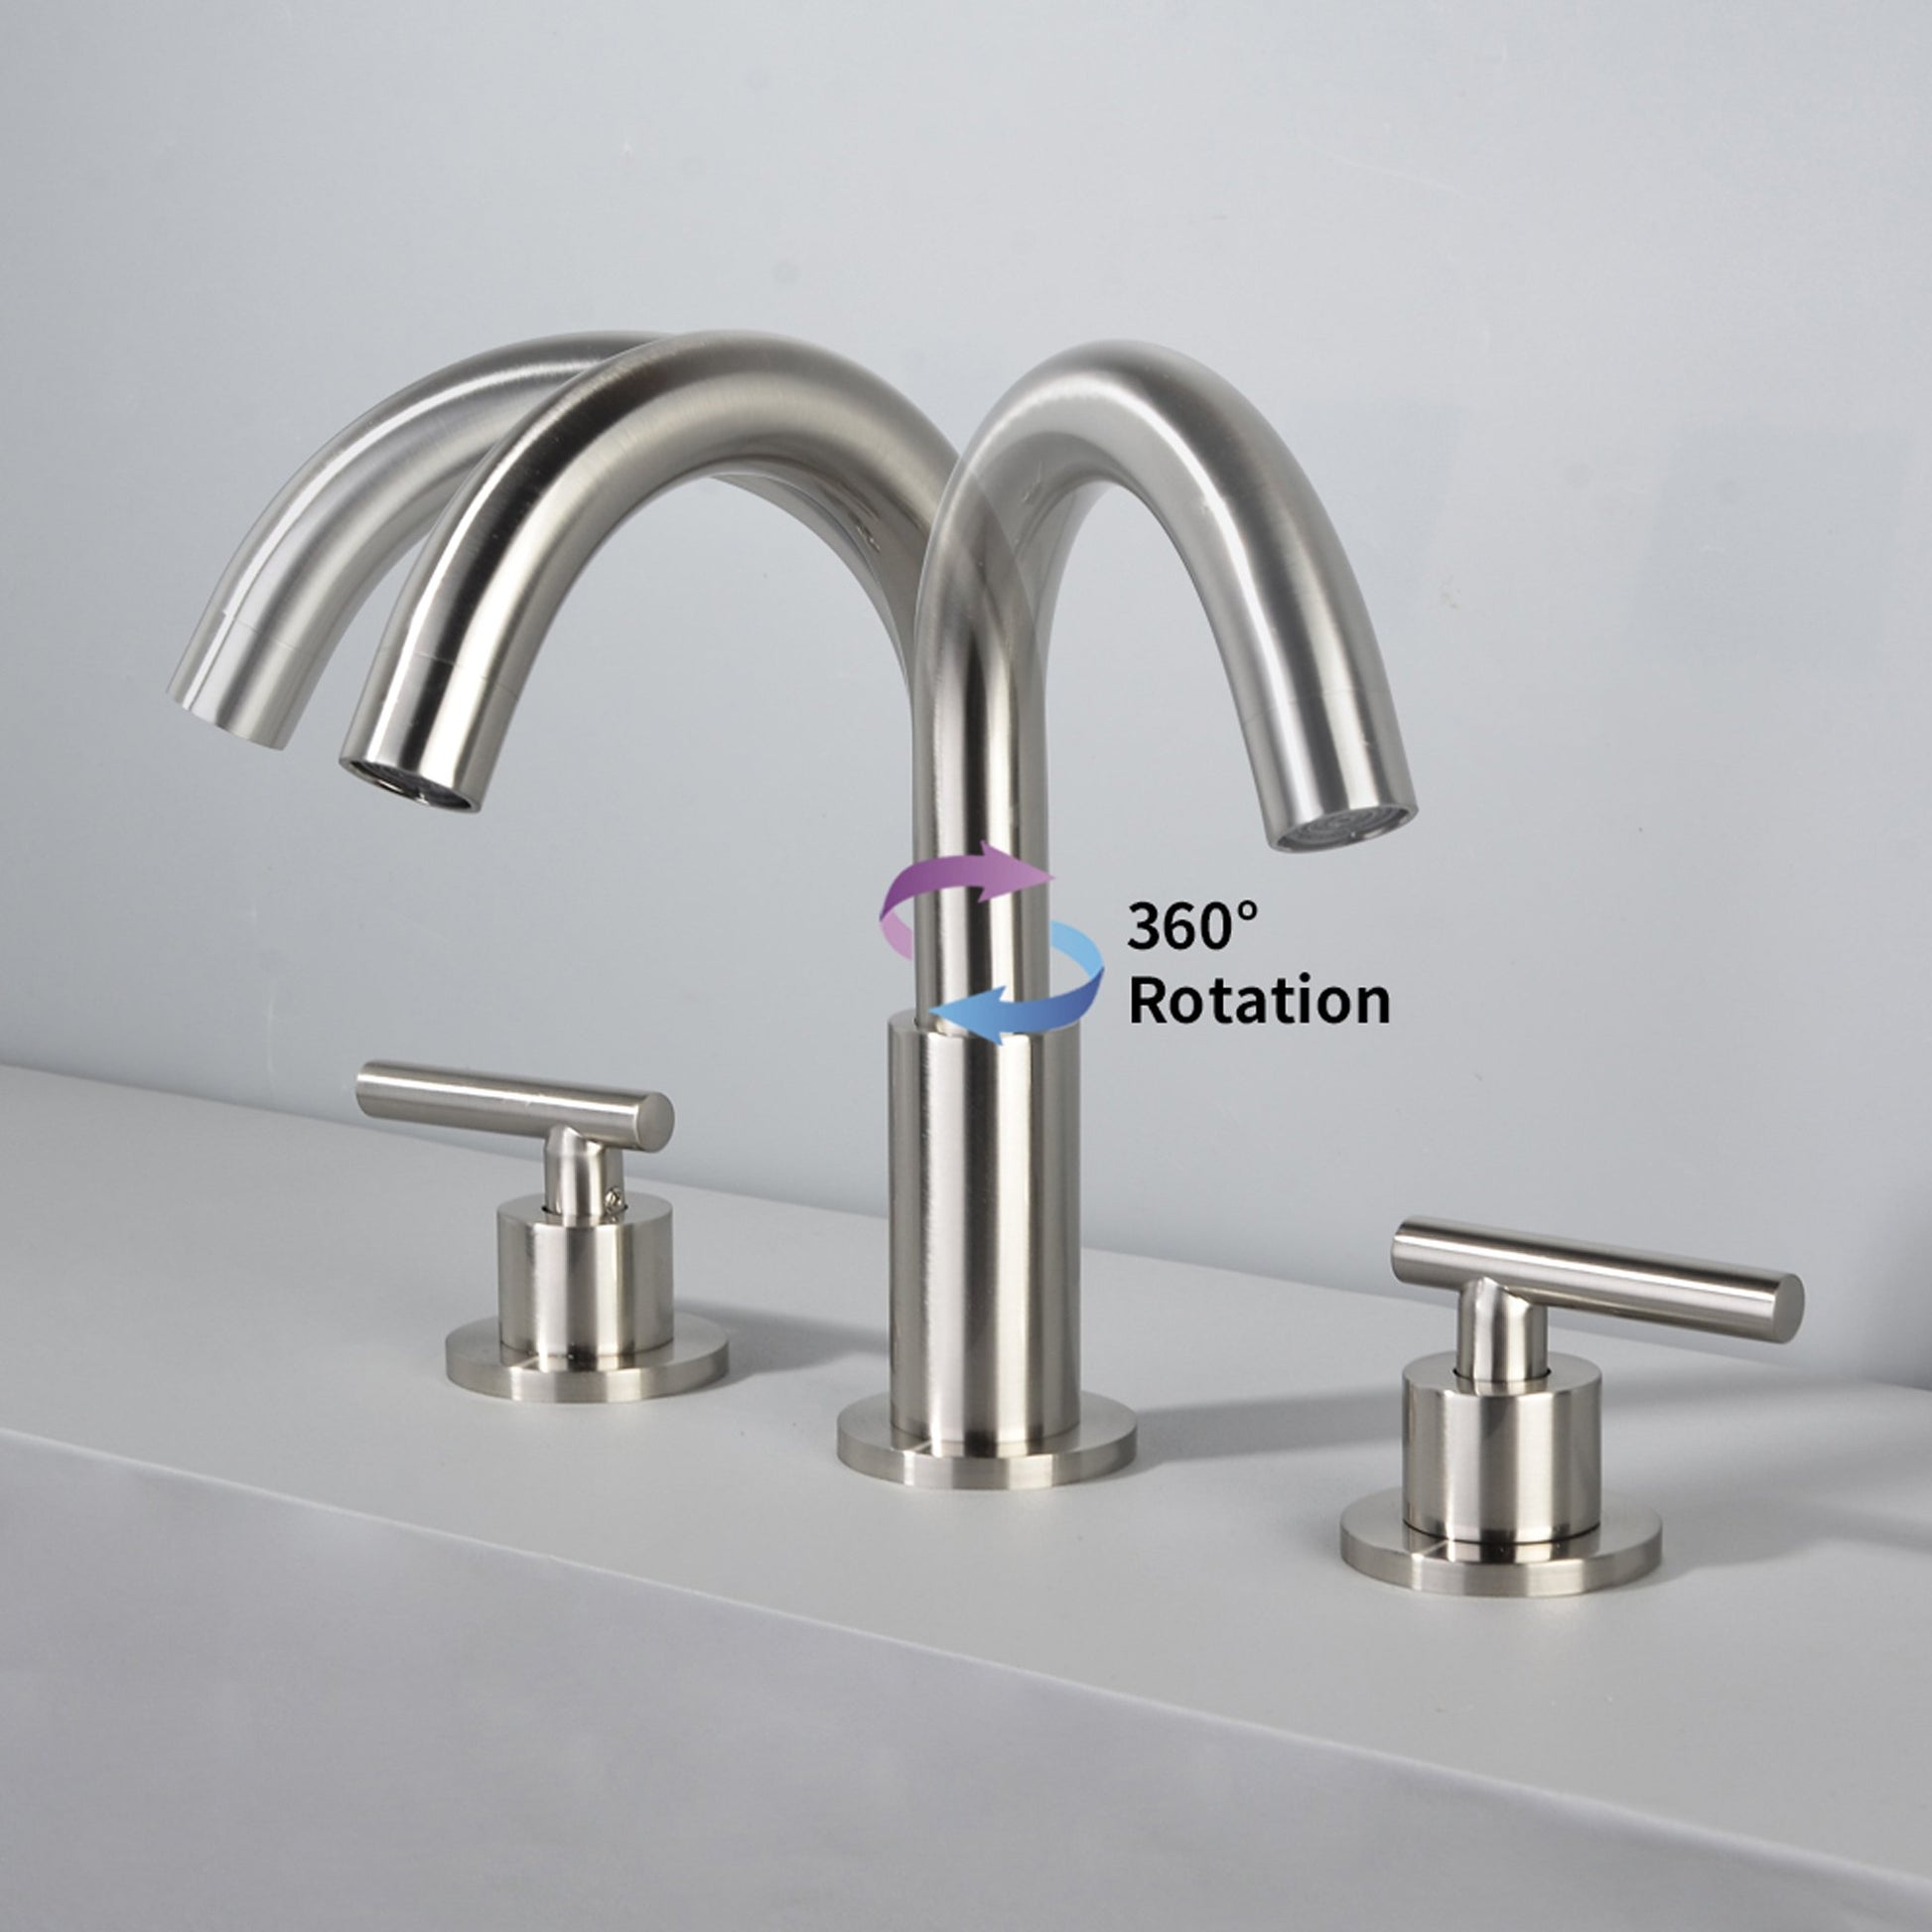 8 in. Widespread 2-Handle Mid-Arc Bathroom Faucet with Valve and cUPC Water Supply Lines in Brushed Nickel - Alipuinc